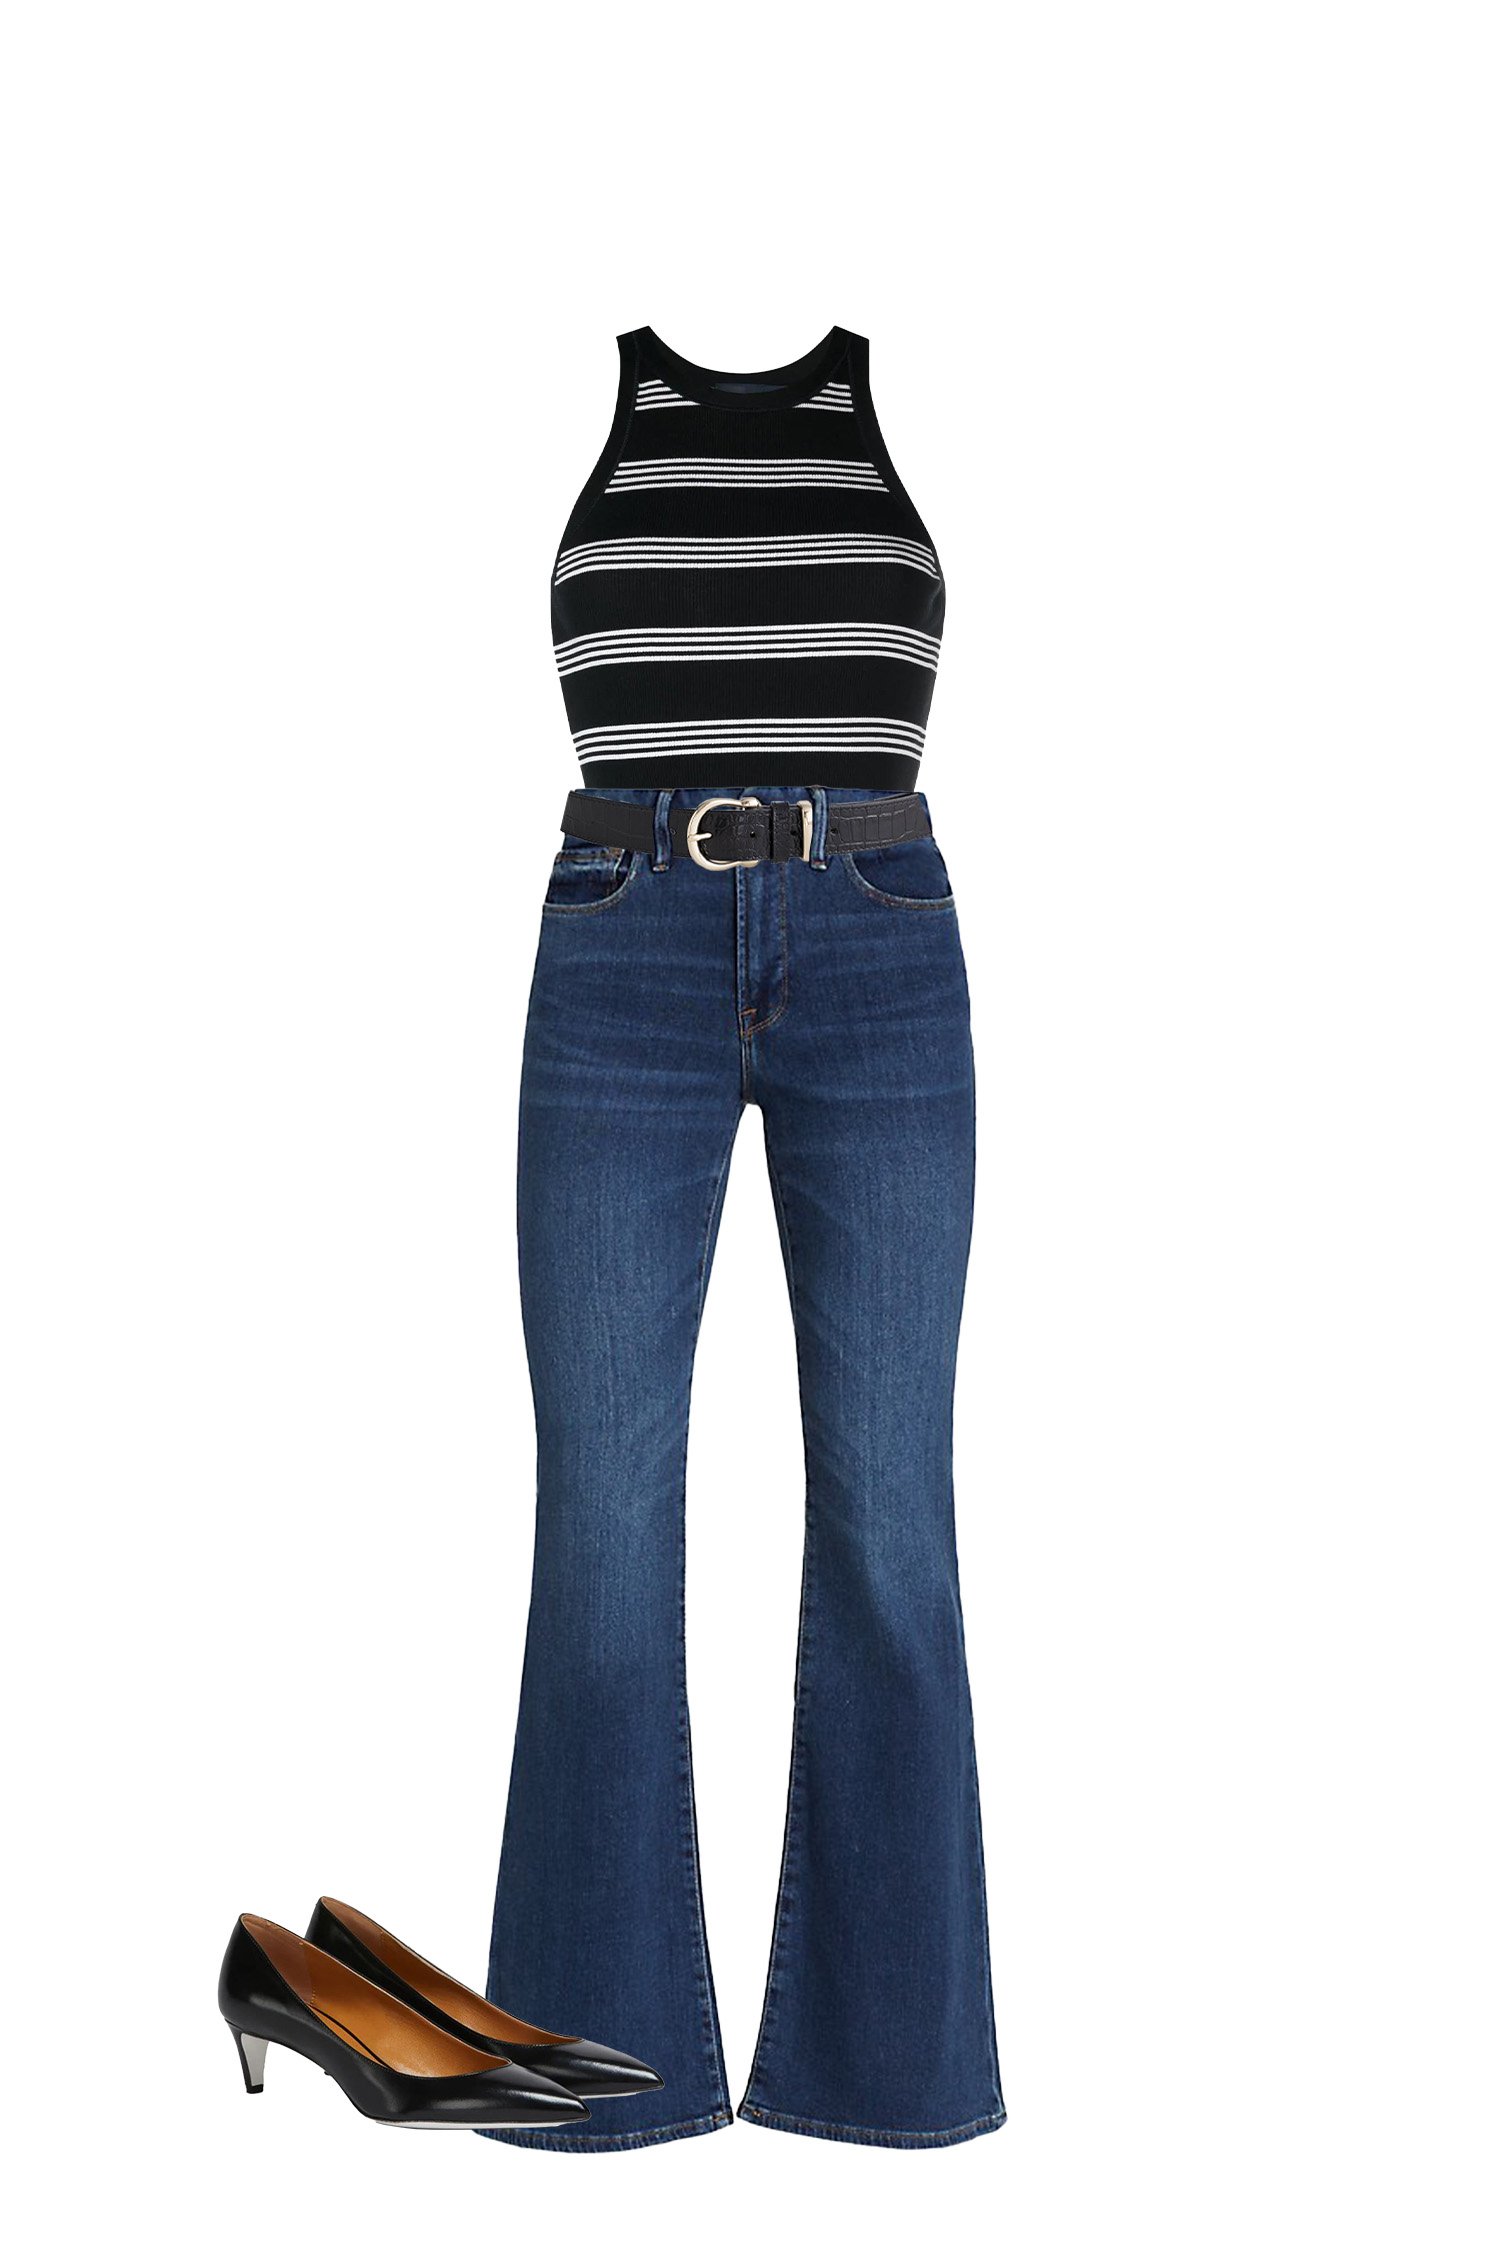 Pair a Classic Blue Flare Jeans with a Navy Stripe Tank Top, and Black Pumps